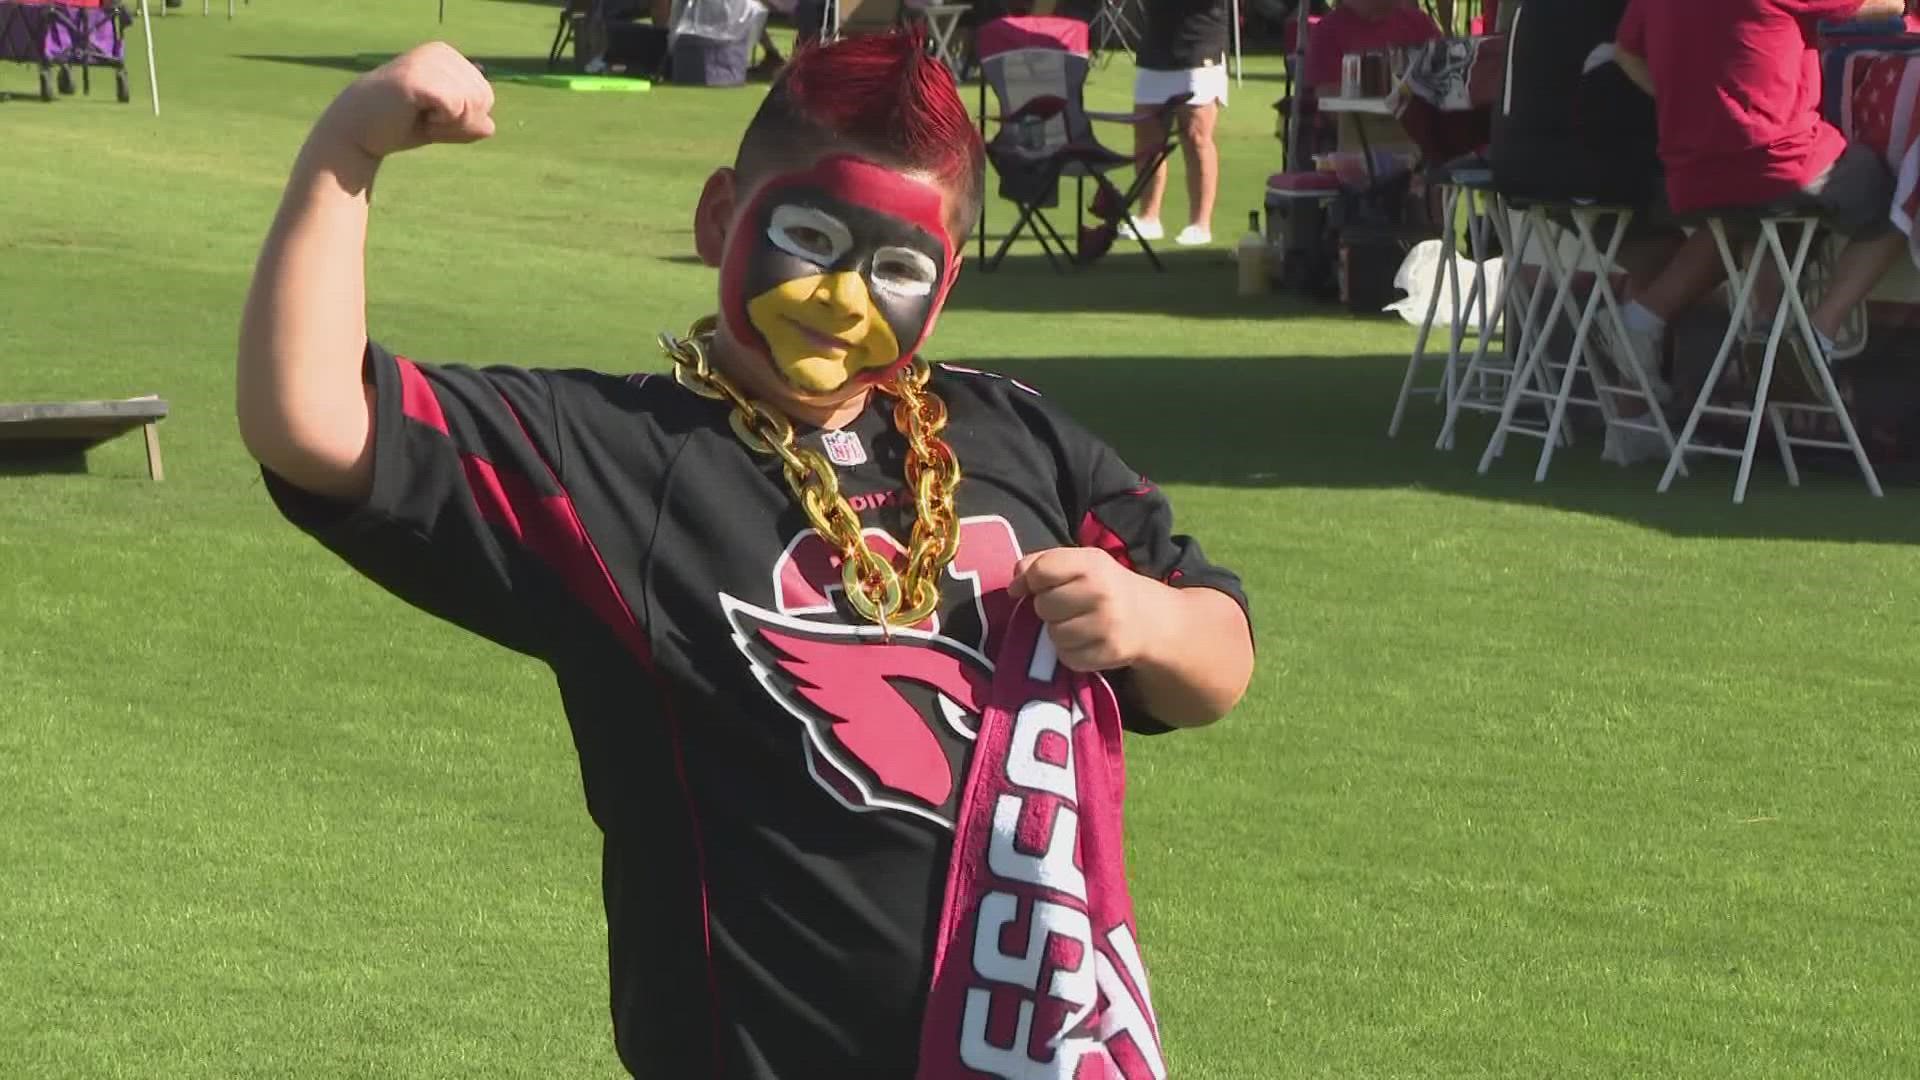 Fans of the Arizona Cardinals are hopeful for a win during the Thursday night game against the New Orleans Saints.